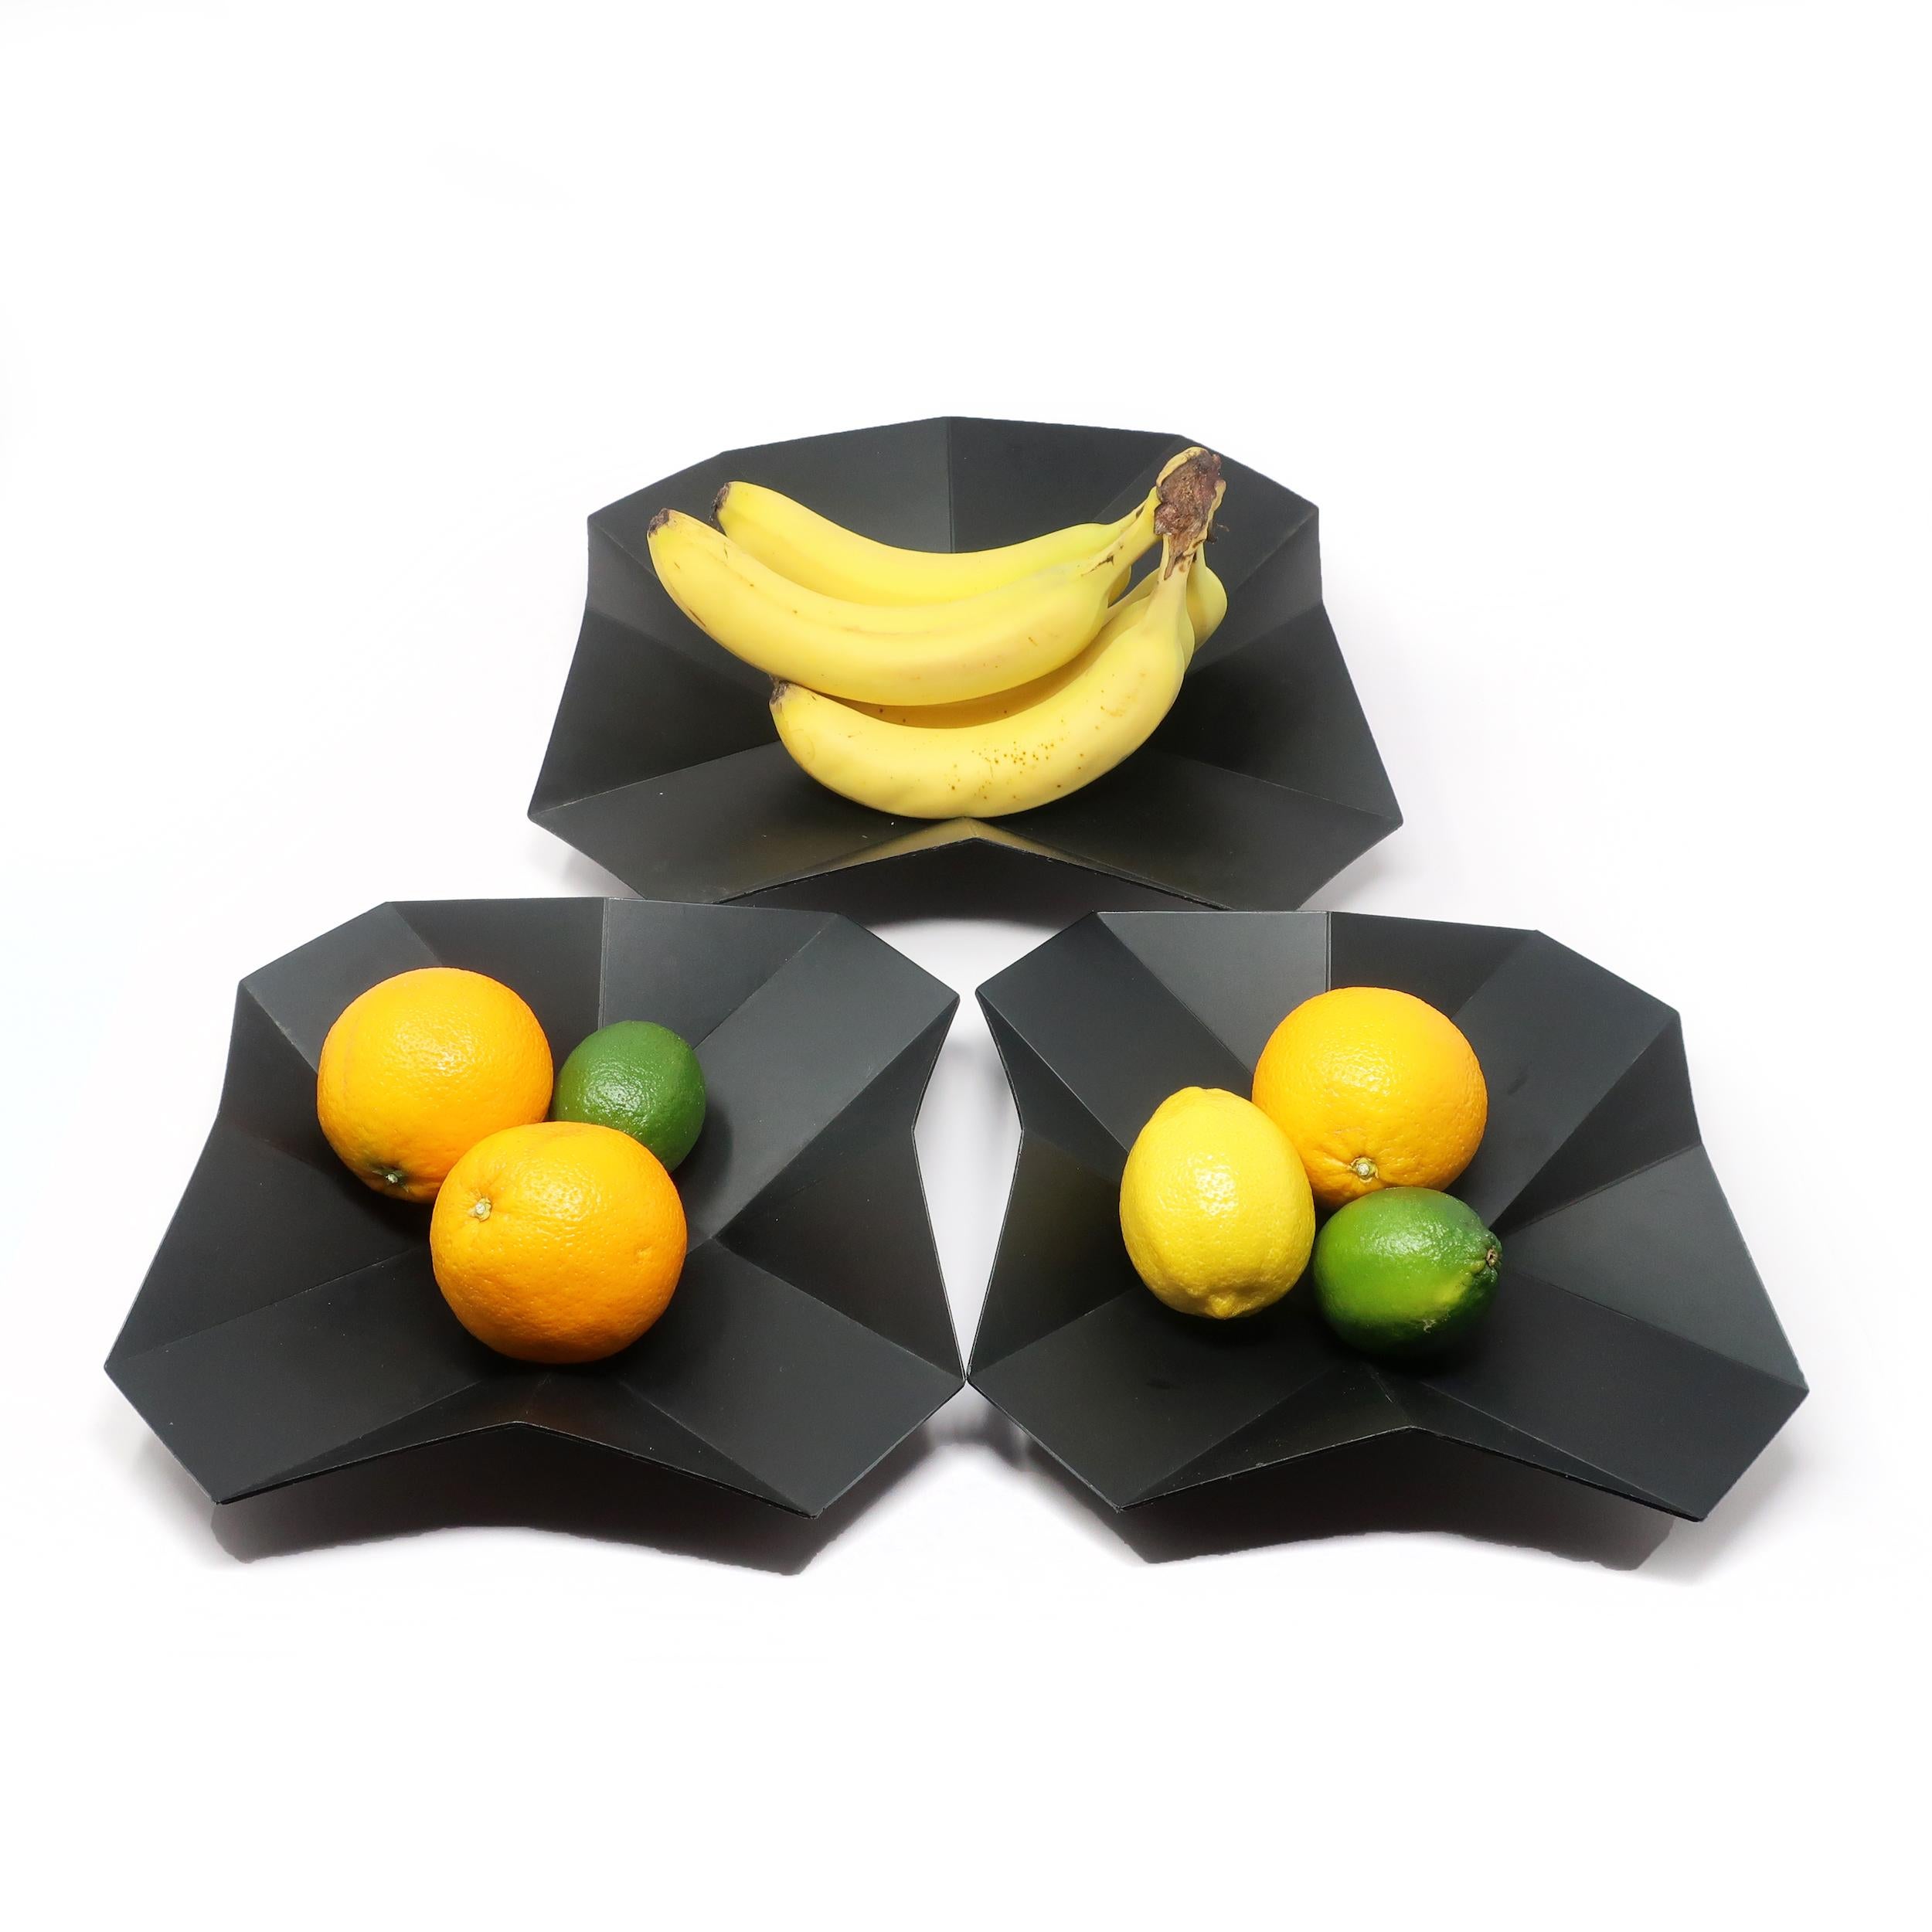 The French duo of Judith Tair, a fashion designer, and Philippe Mercier, an art director, are the creators behind a line of whimsical placemats and plates that were wildly successful in the 1980s. This set of 3 Origami plates are dated 1987 and